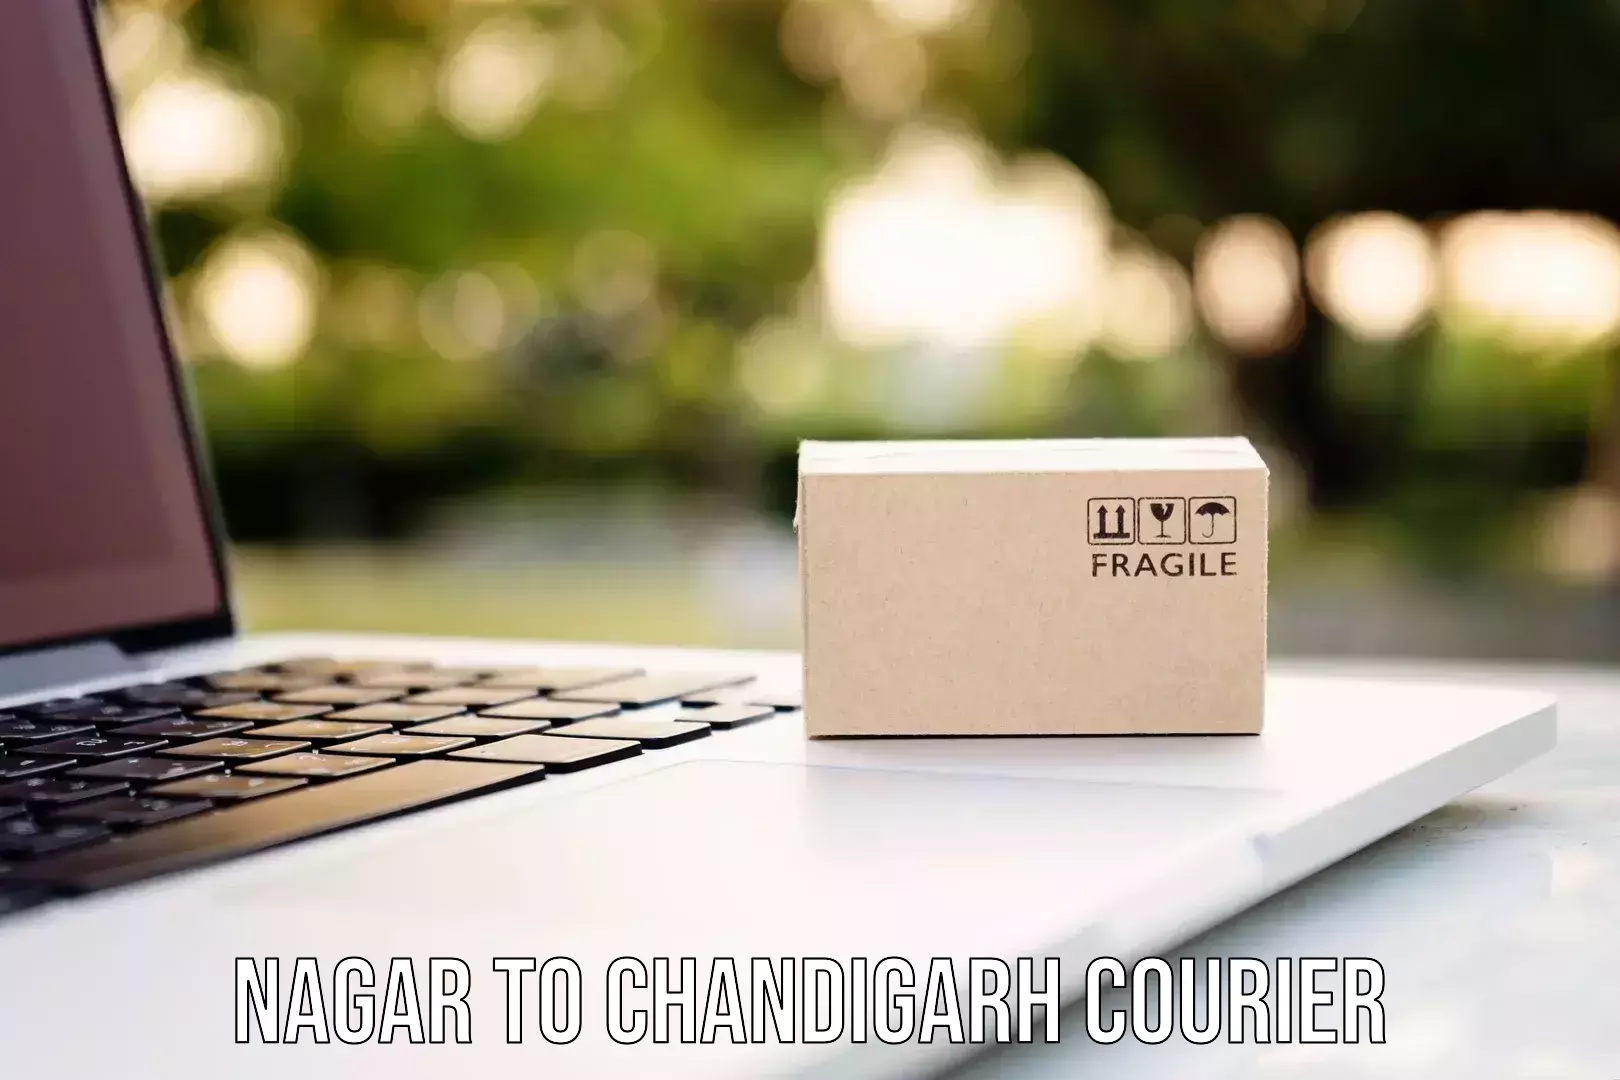 Package delivery network Nagar to Chandigarh